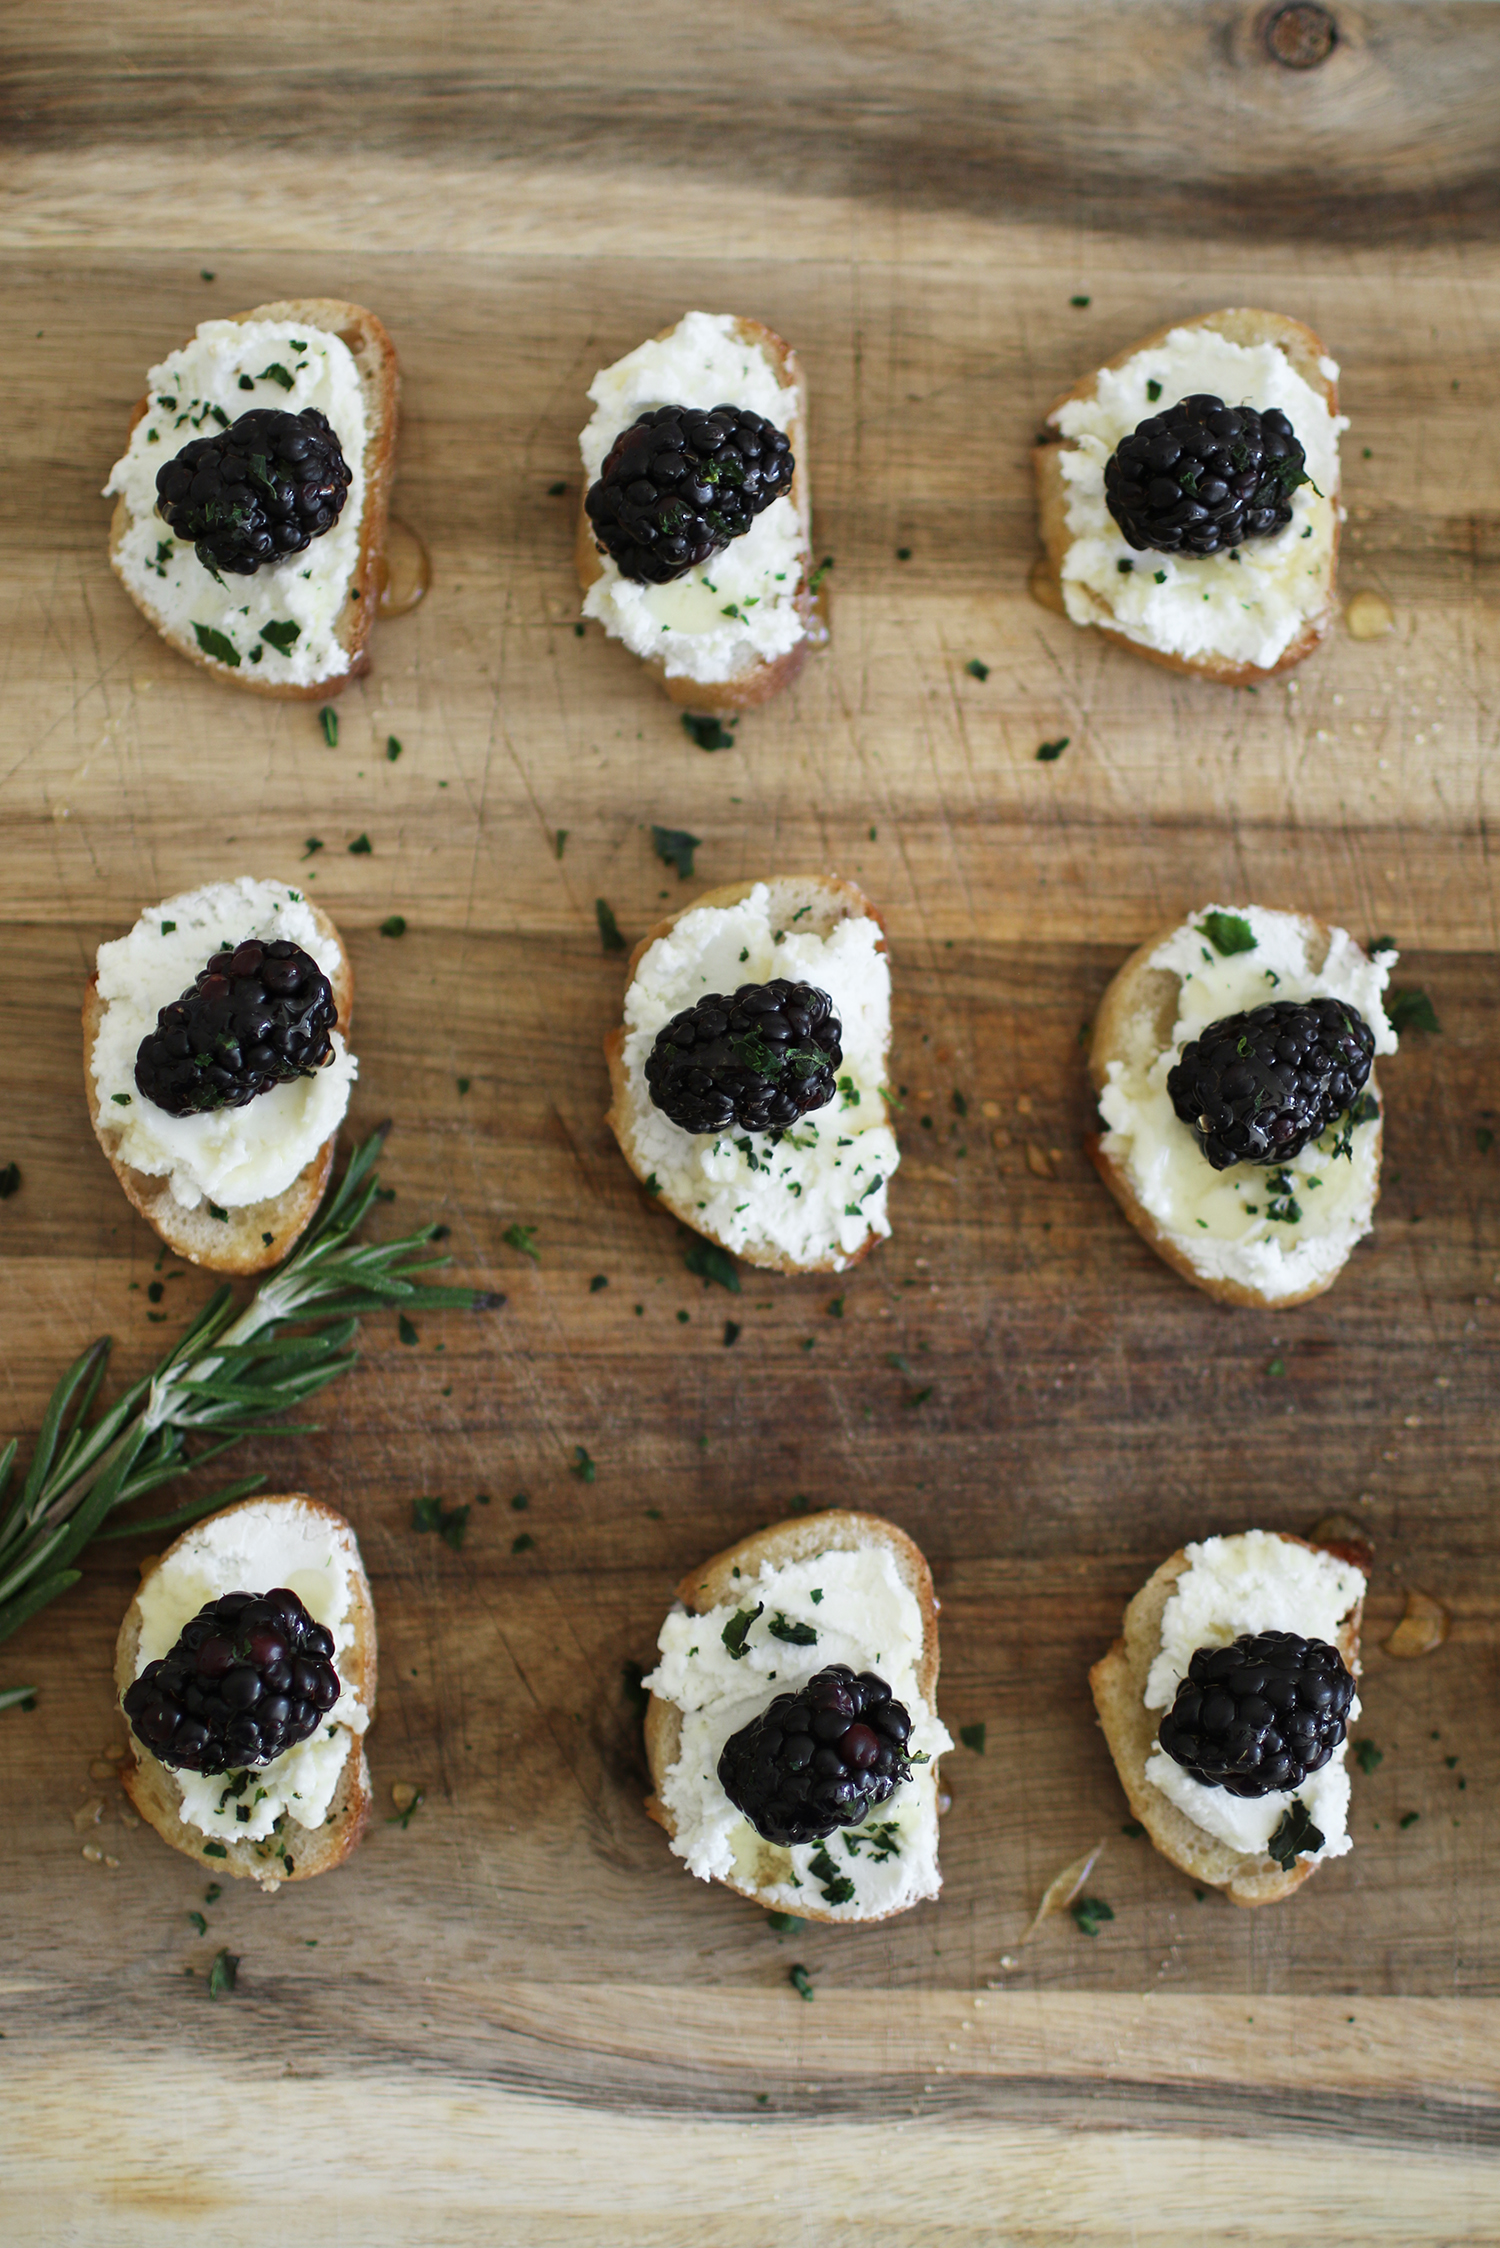 A blackberry and goat cheese crostini appetizer recipe. An easy and beautiful way to wow at your next gathering. Bookmark the recipe over at KaraLayne.com